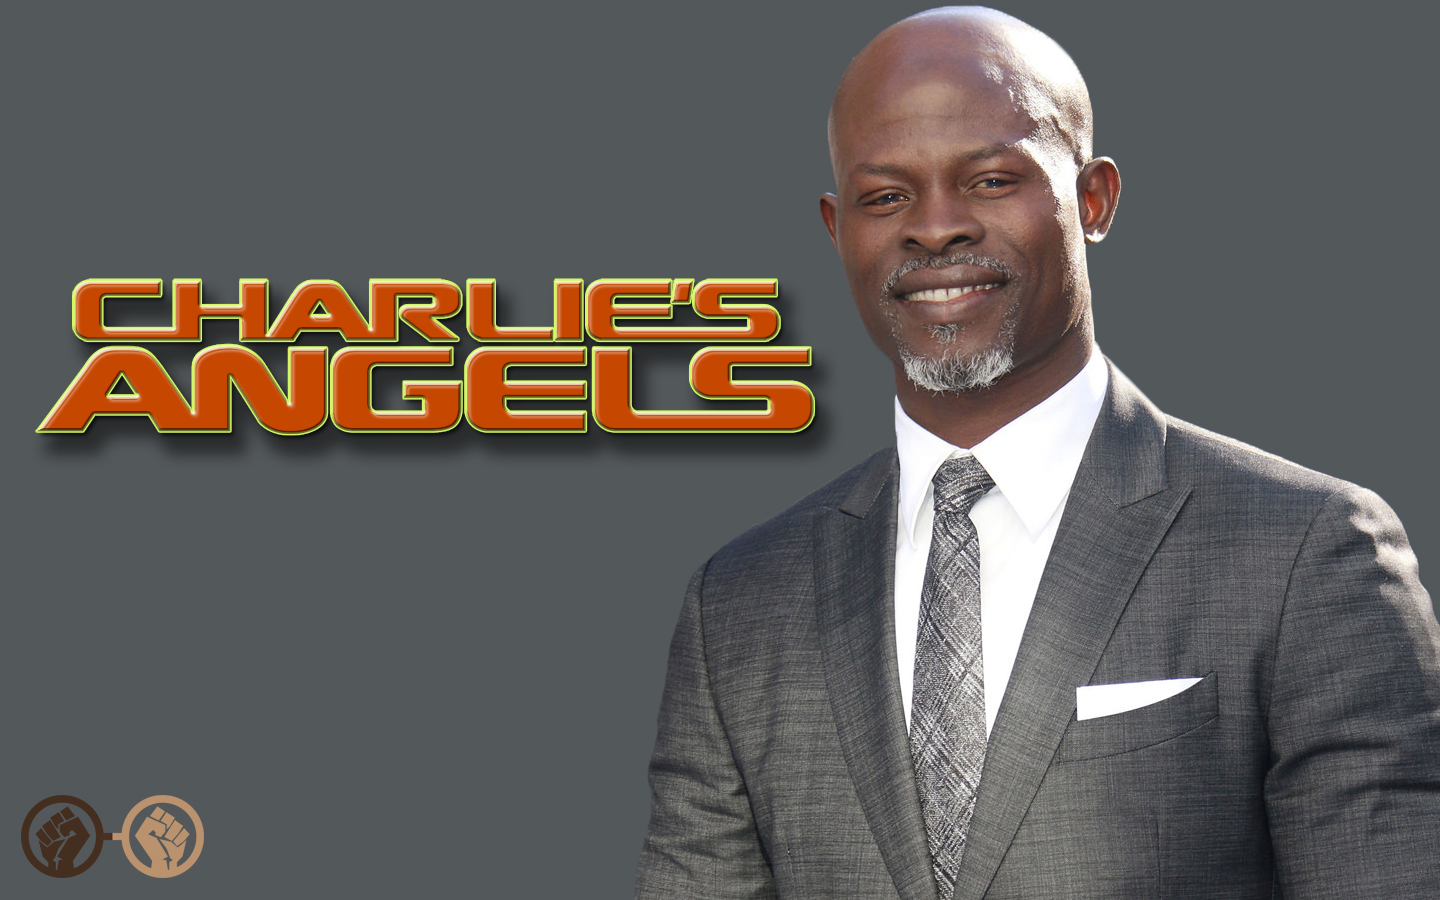 Djimon Hounsou to Play One of the Bosleys in Sony’s ‘Charlie’s Angels’ Reboot